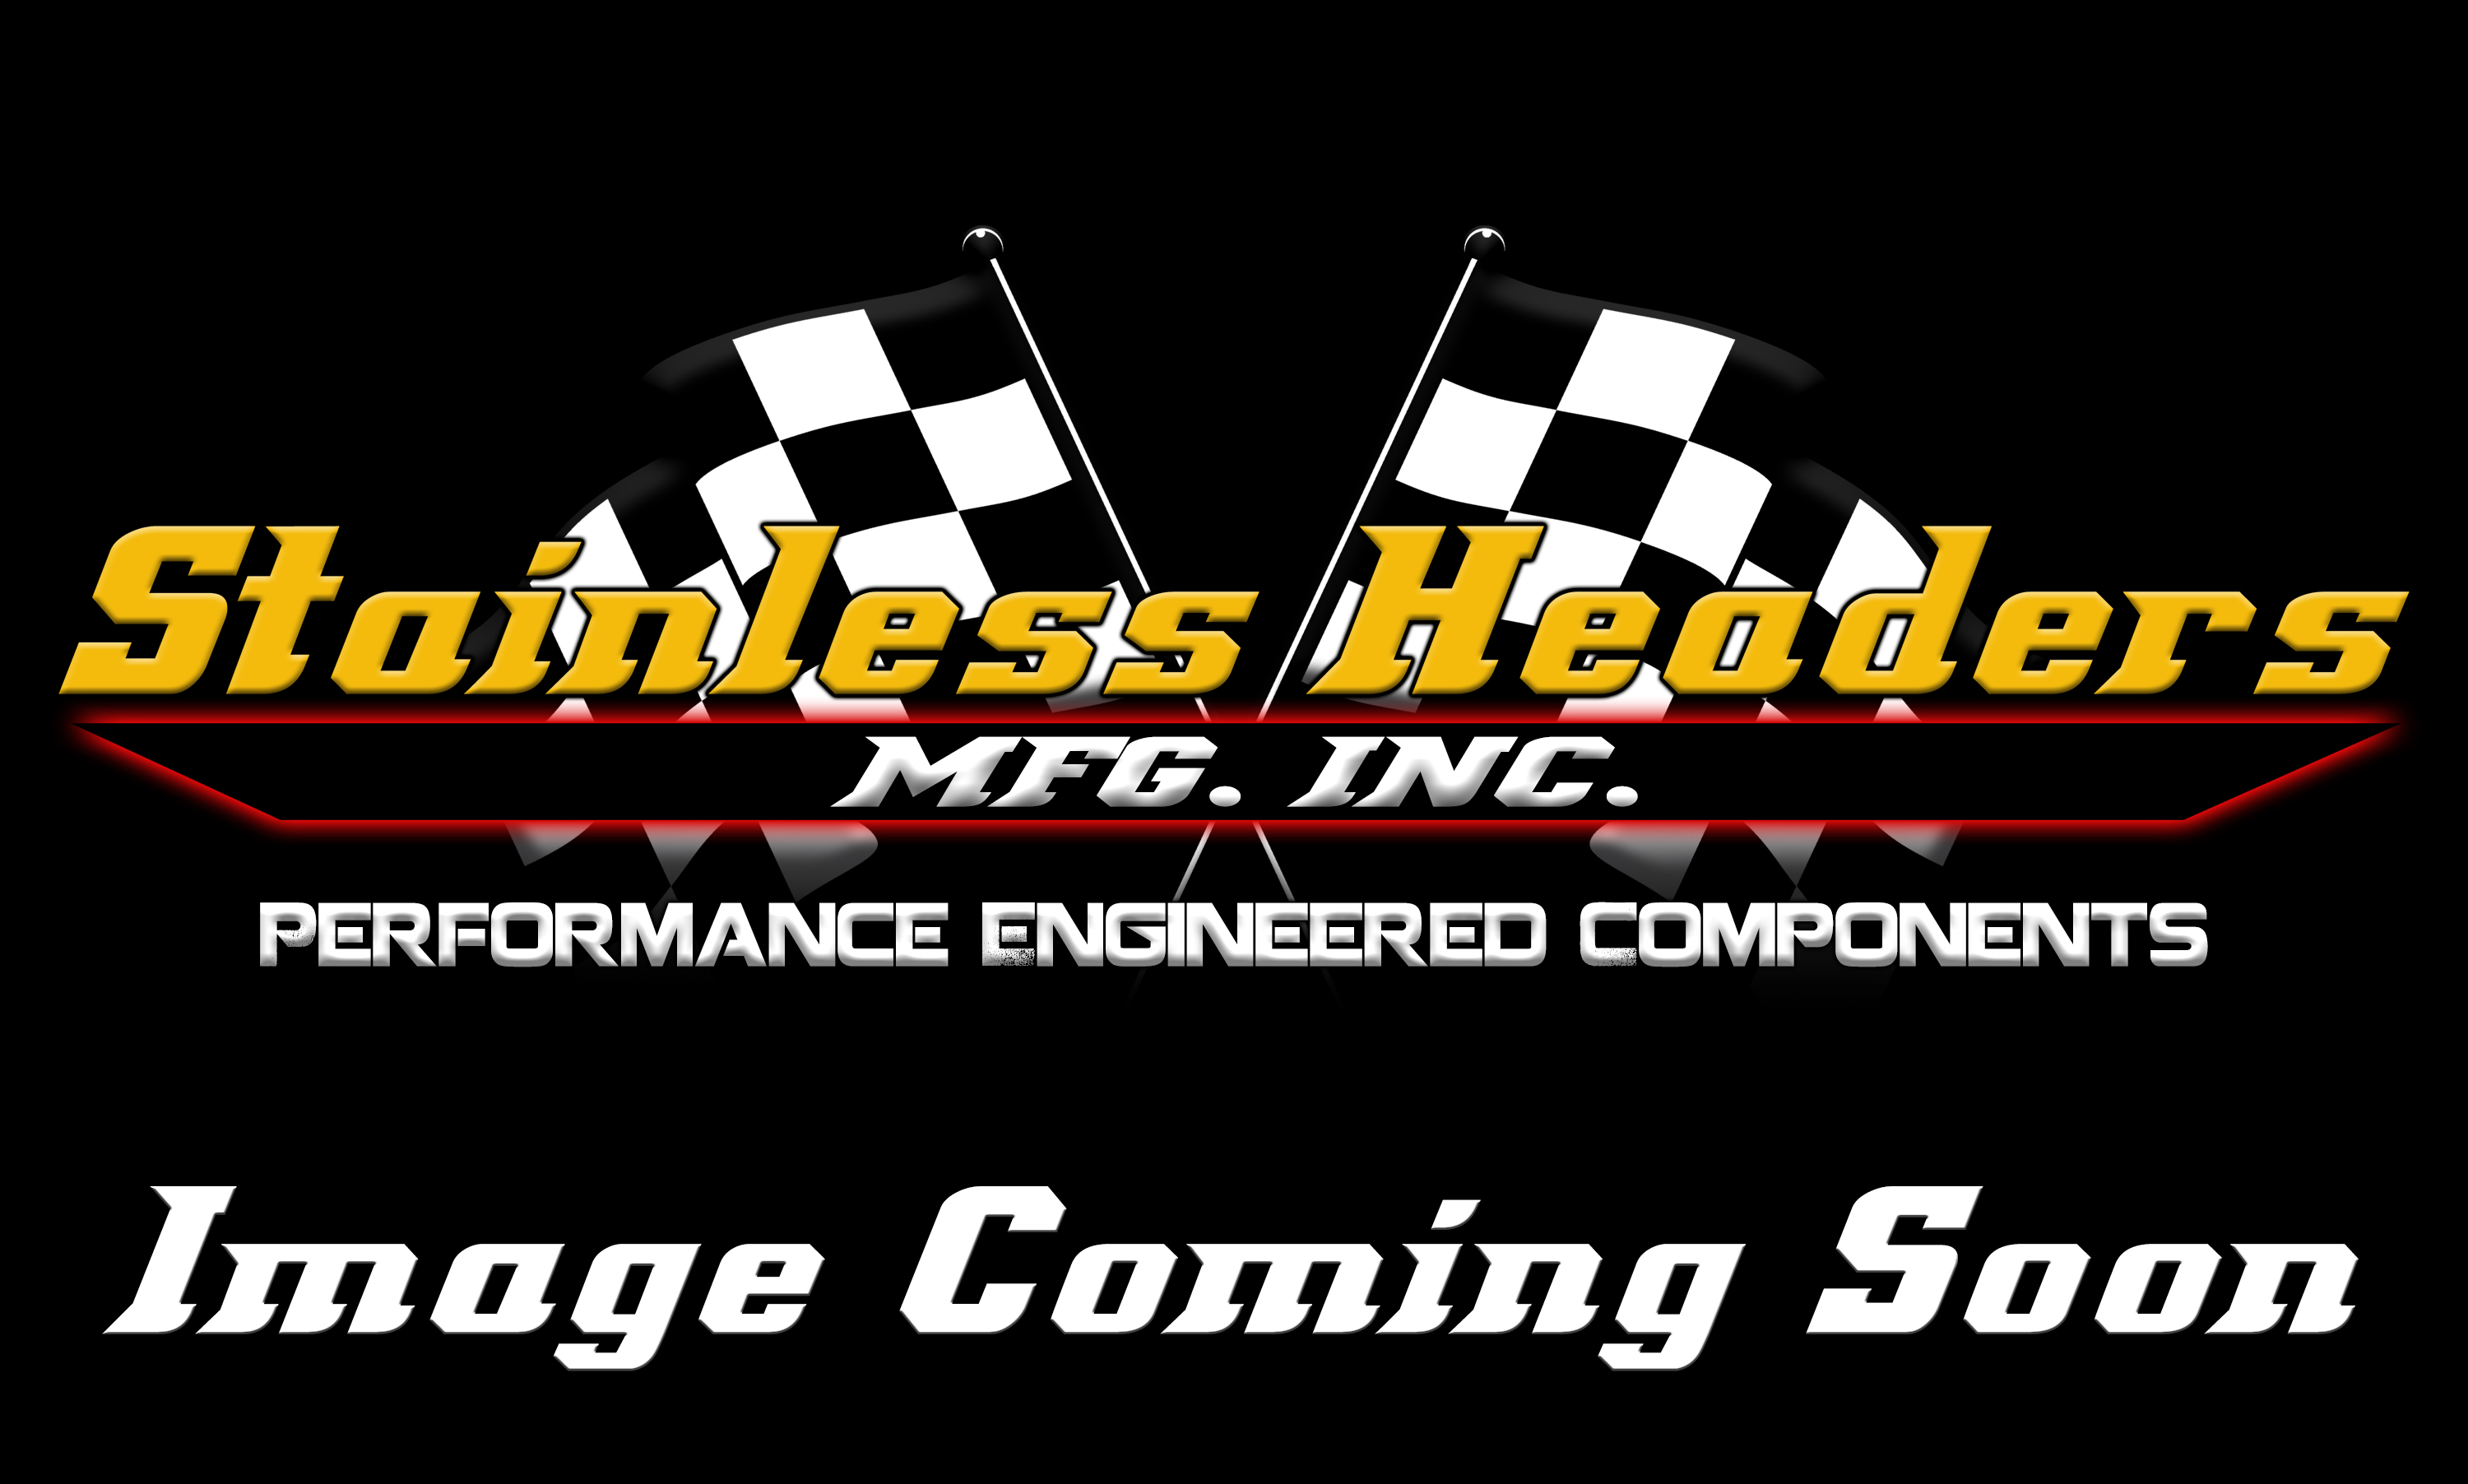 Stainless Headers - 2 3/8" Primary 2 into 1 Performance Merge Collector-16ga 321ss - Image 3